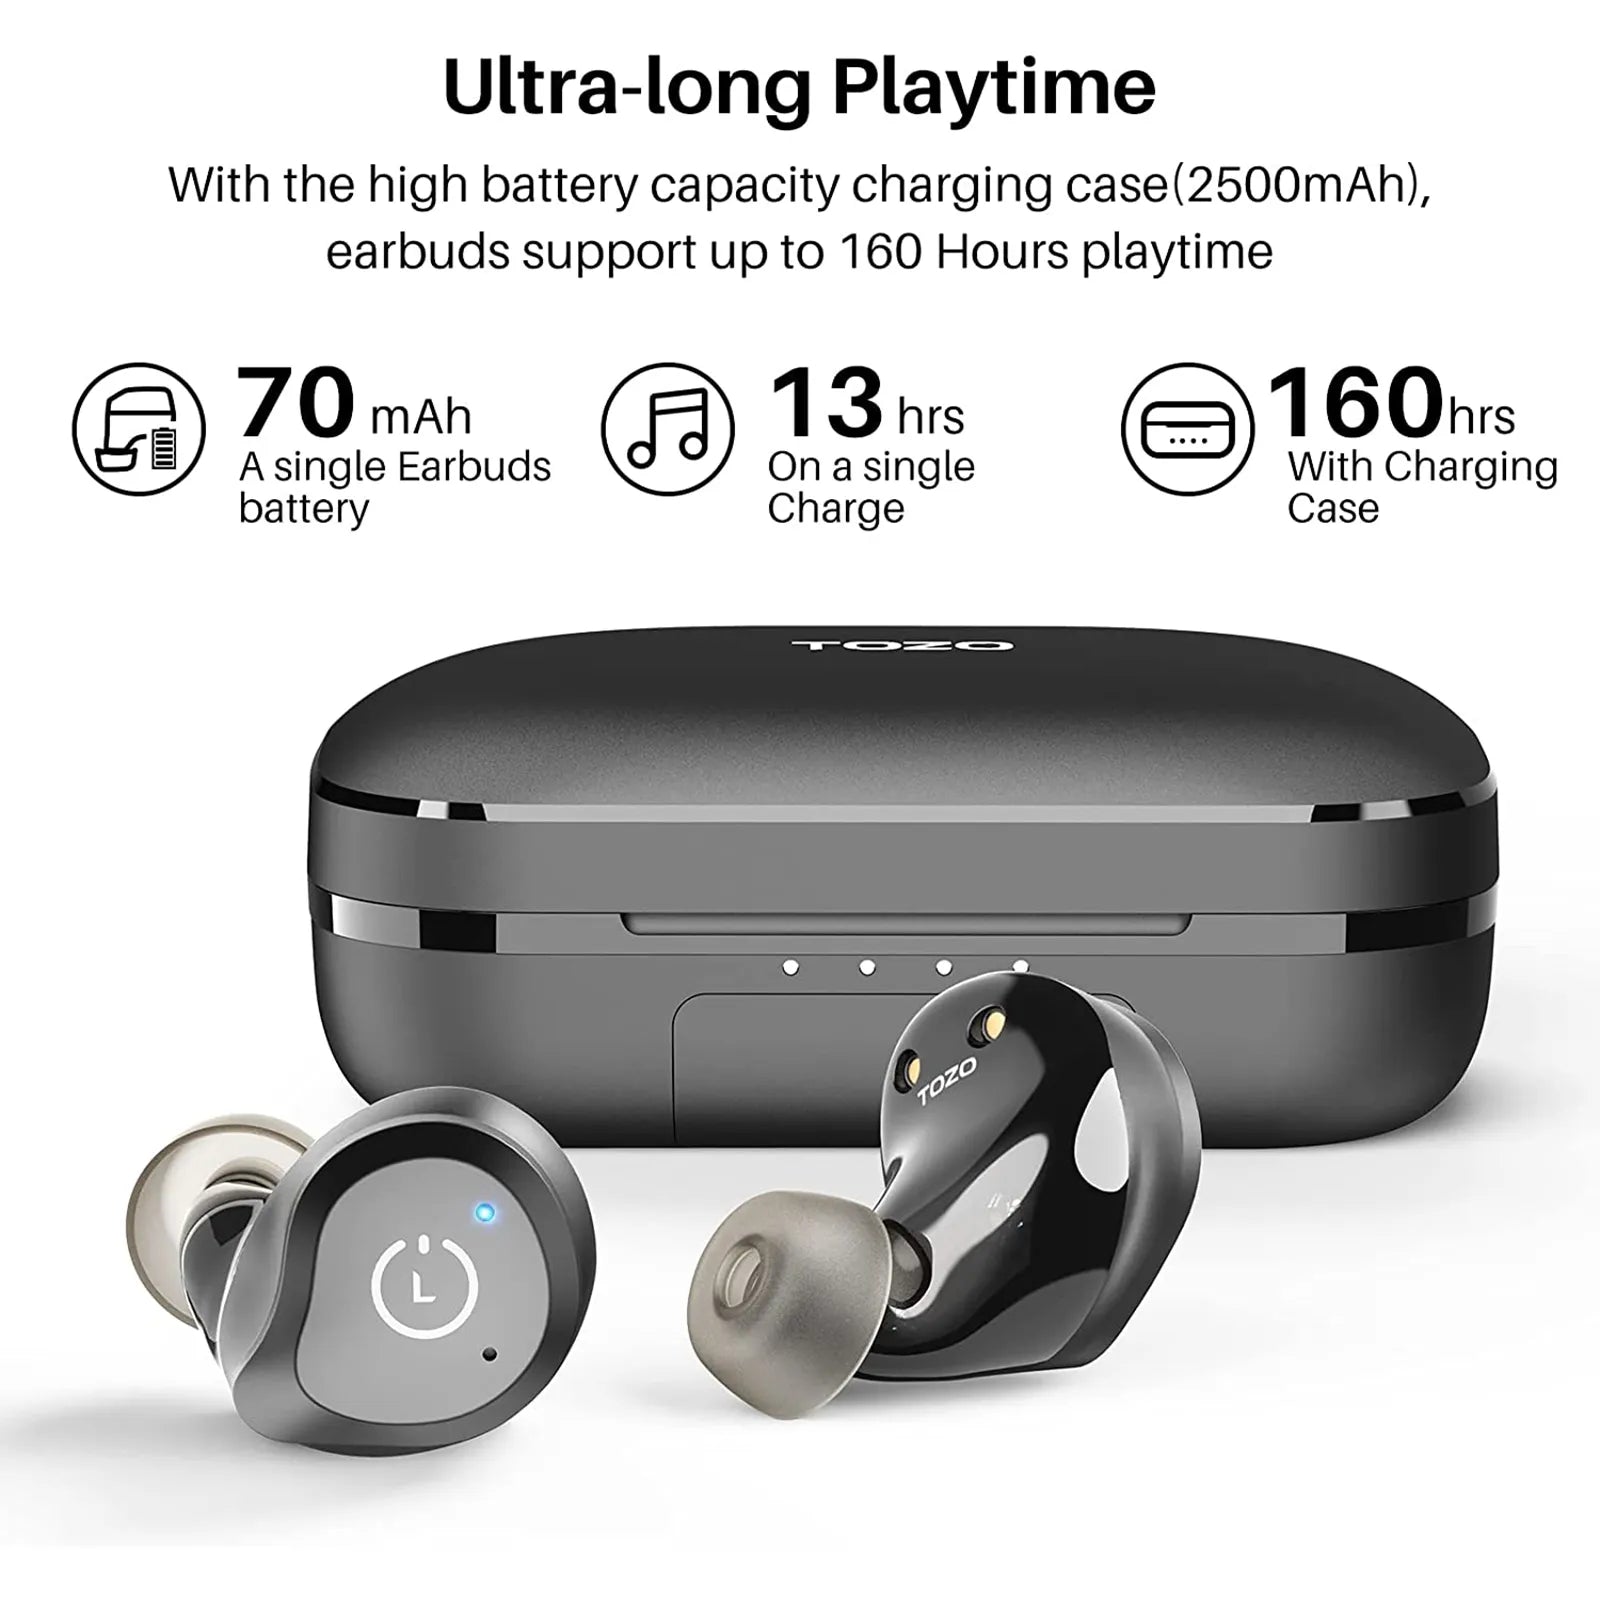 NC9 Hybrid Active Noise Cancelling Wireless Earbuds- TOZO